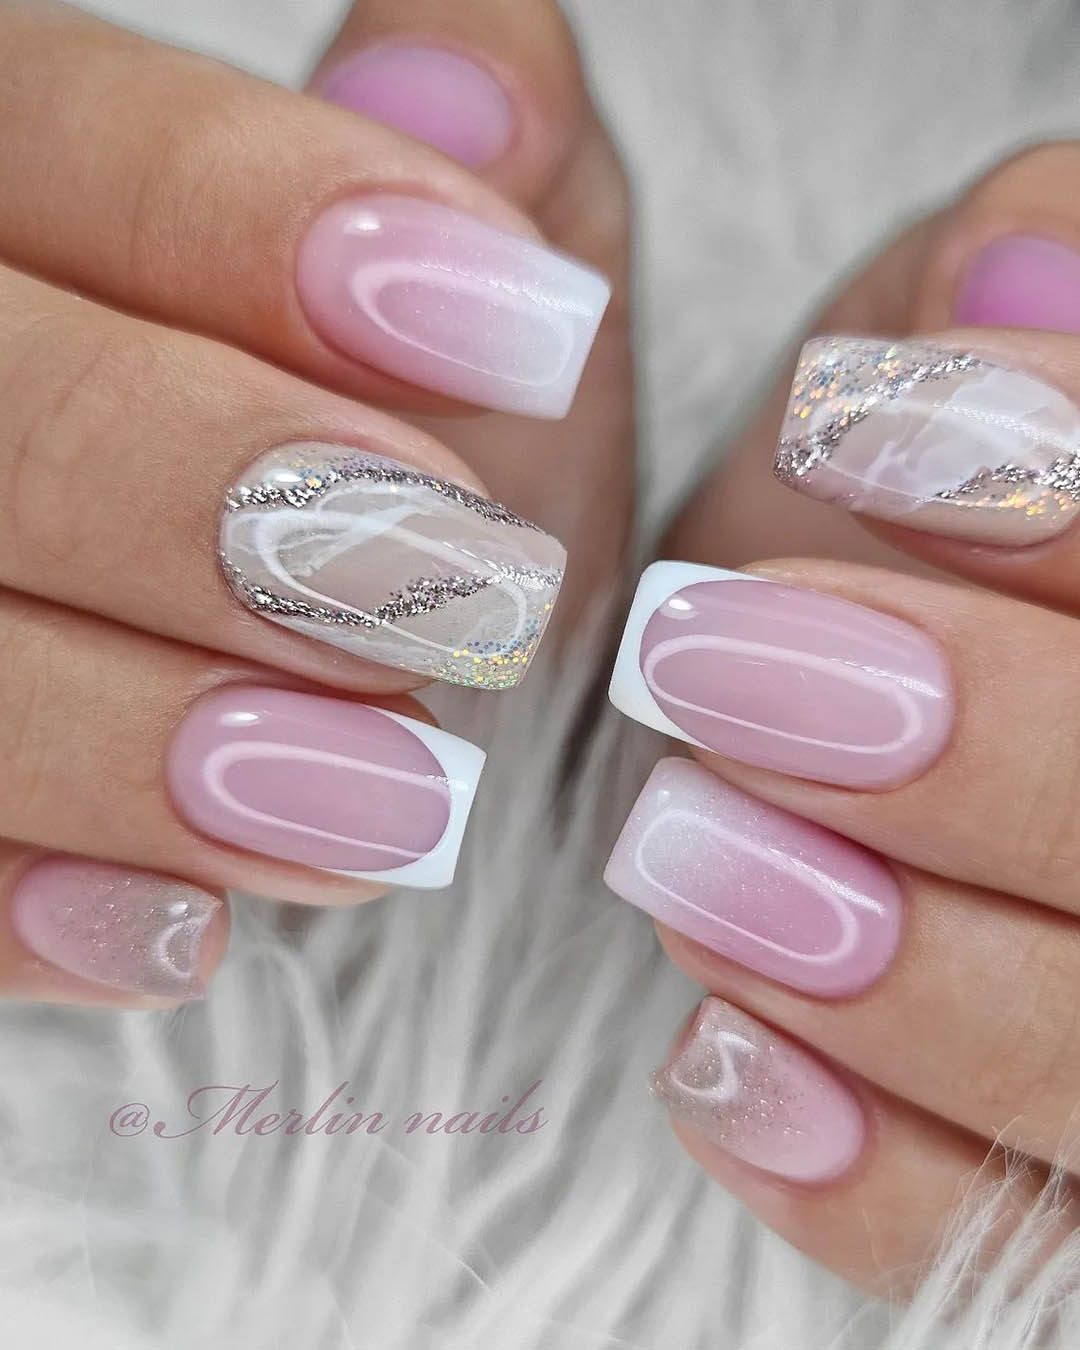 wedding nails with glitter pink marble and french merlin_nails